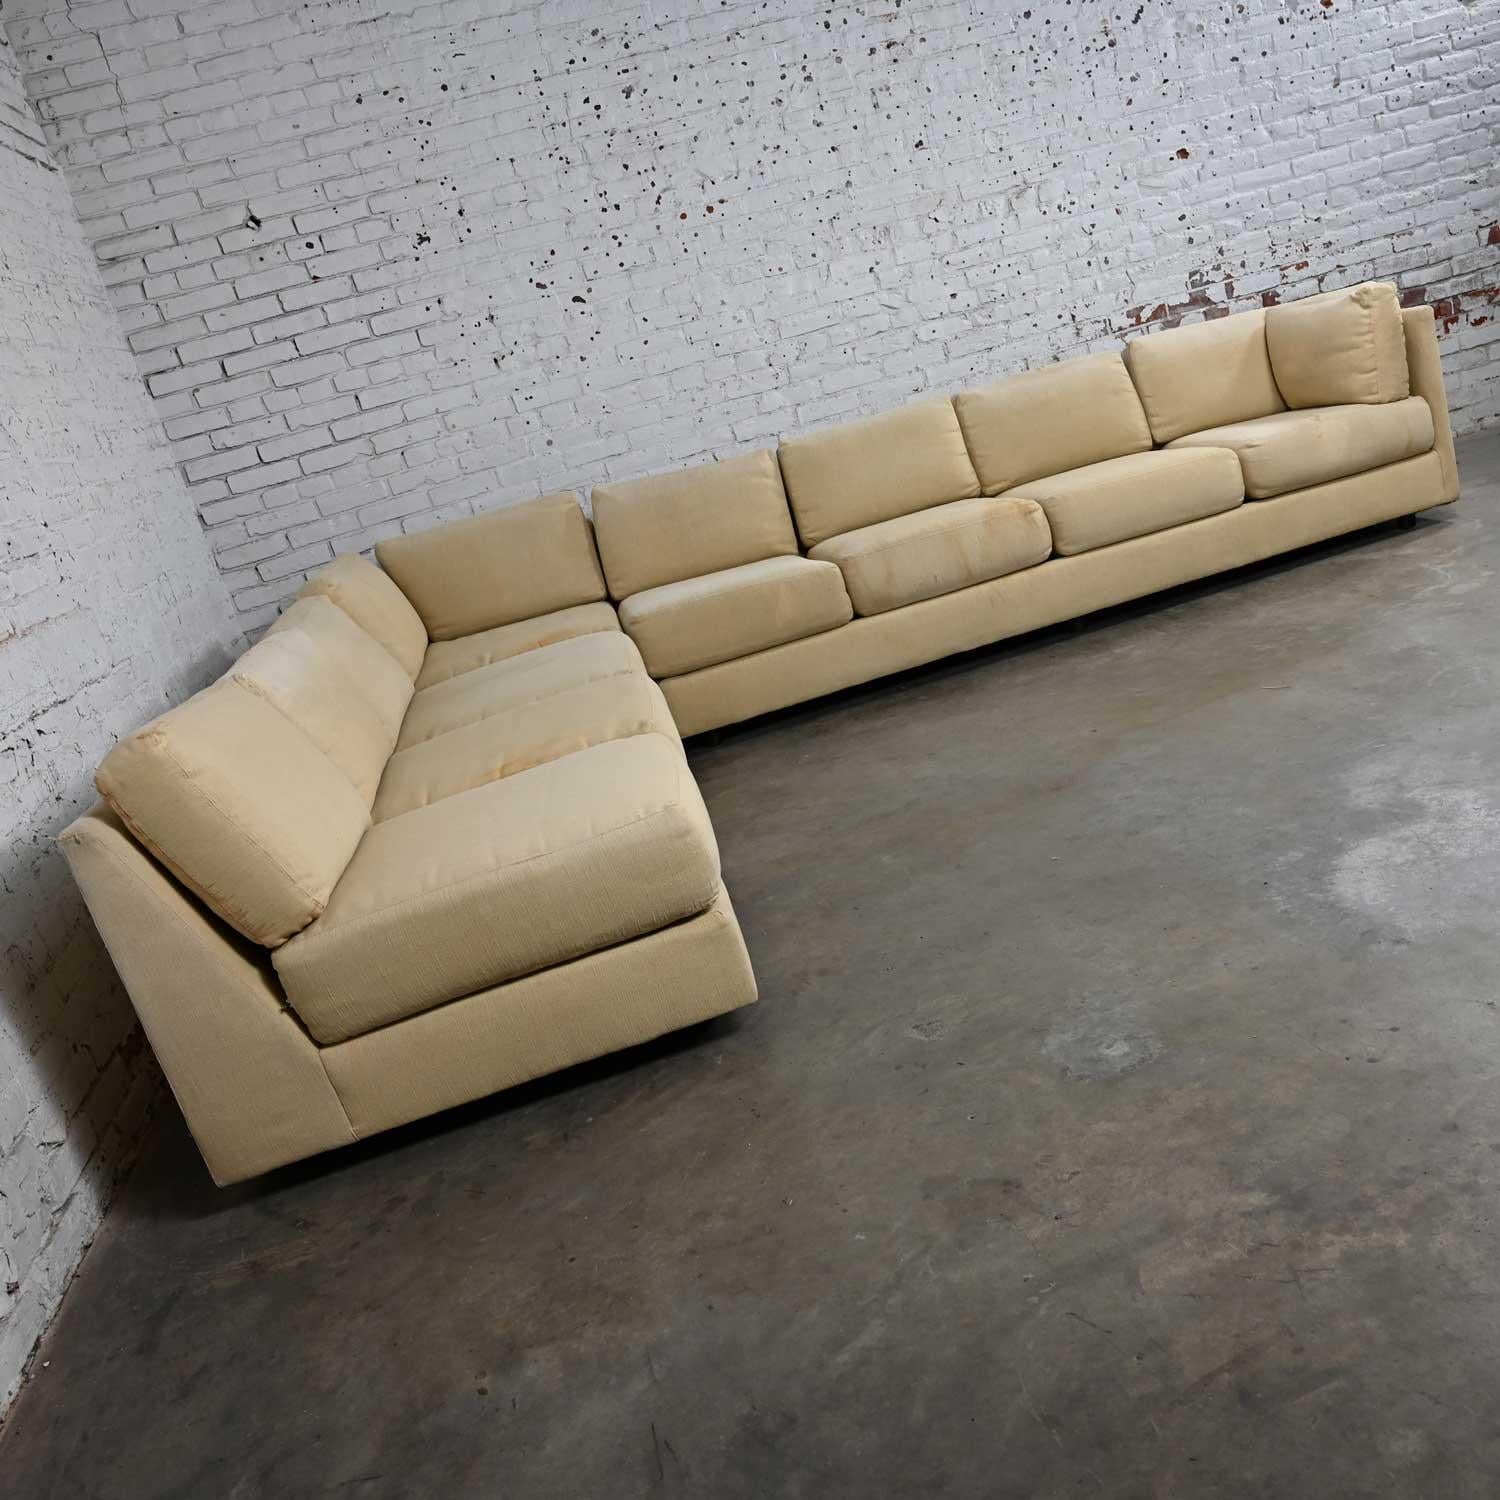 Wonderful vintage MCM (a.k.a.) Mid-Century Modern to modern tuxedo style custom sectional sofa by Classic Gallery. This listing price is for frame only. It will need reupholstery. See note below for details. Comprised of 3 sections: One 3 seat